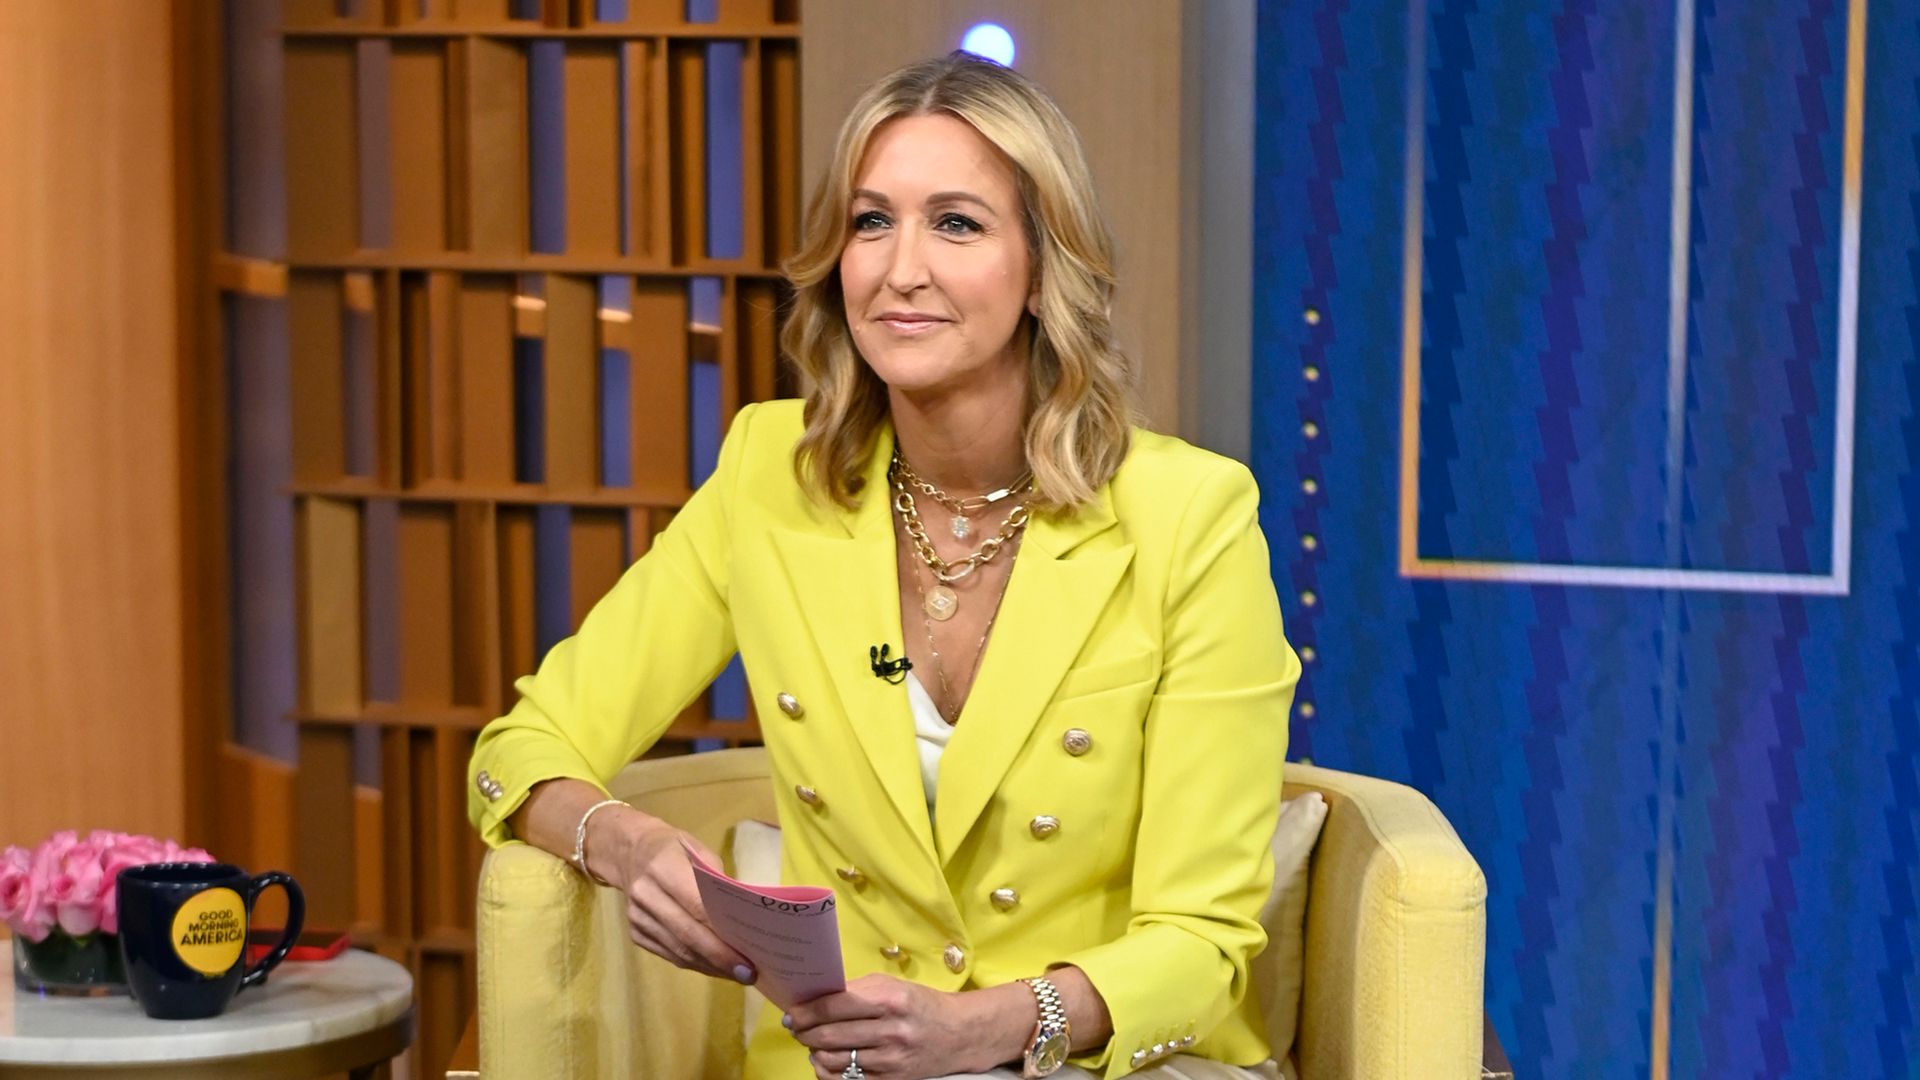 Lara Spencer wears a yellow suit on Good Morning America